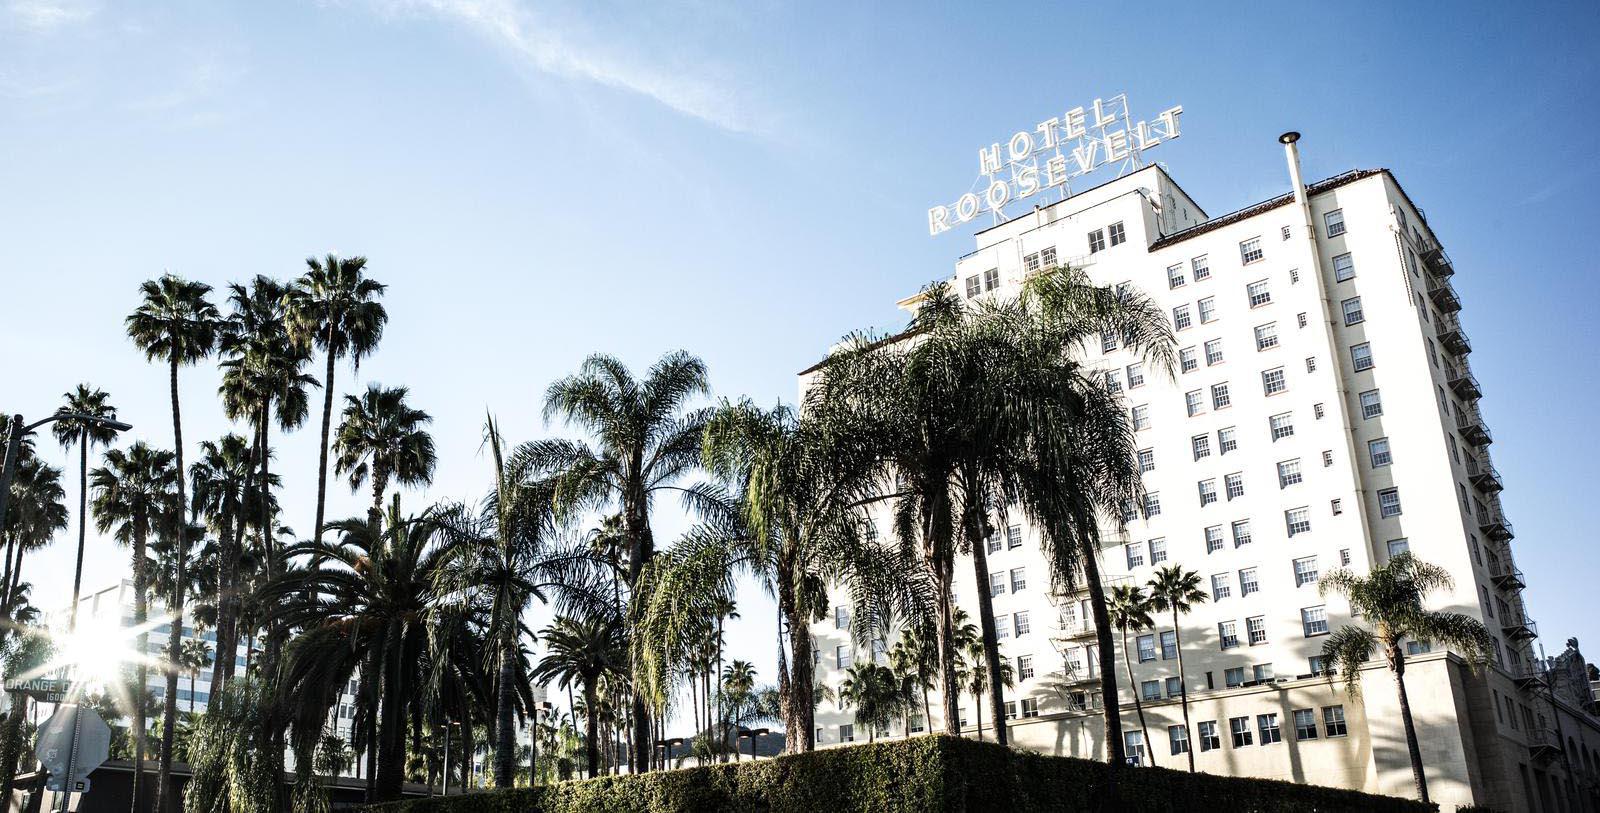 Image of Hotel Exterior with Palm Trees The Hollywood Roosevelt, 1927, Member of Historic Hotels of America, in Hollywood, California, Overview